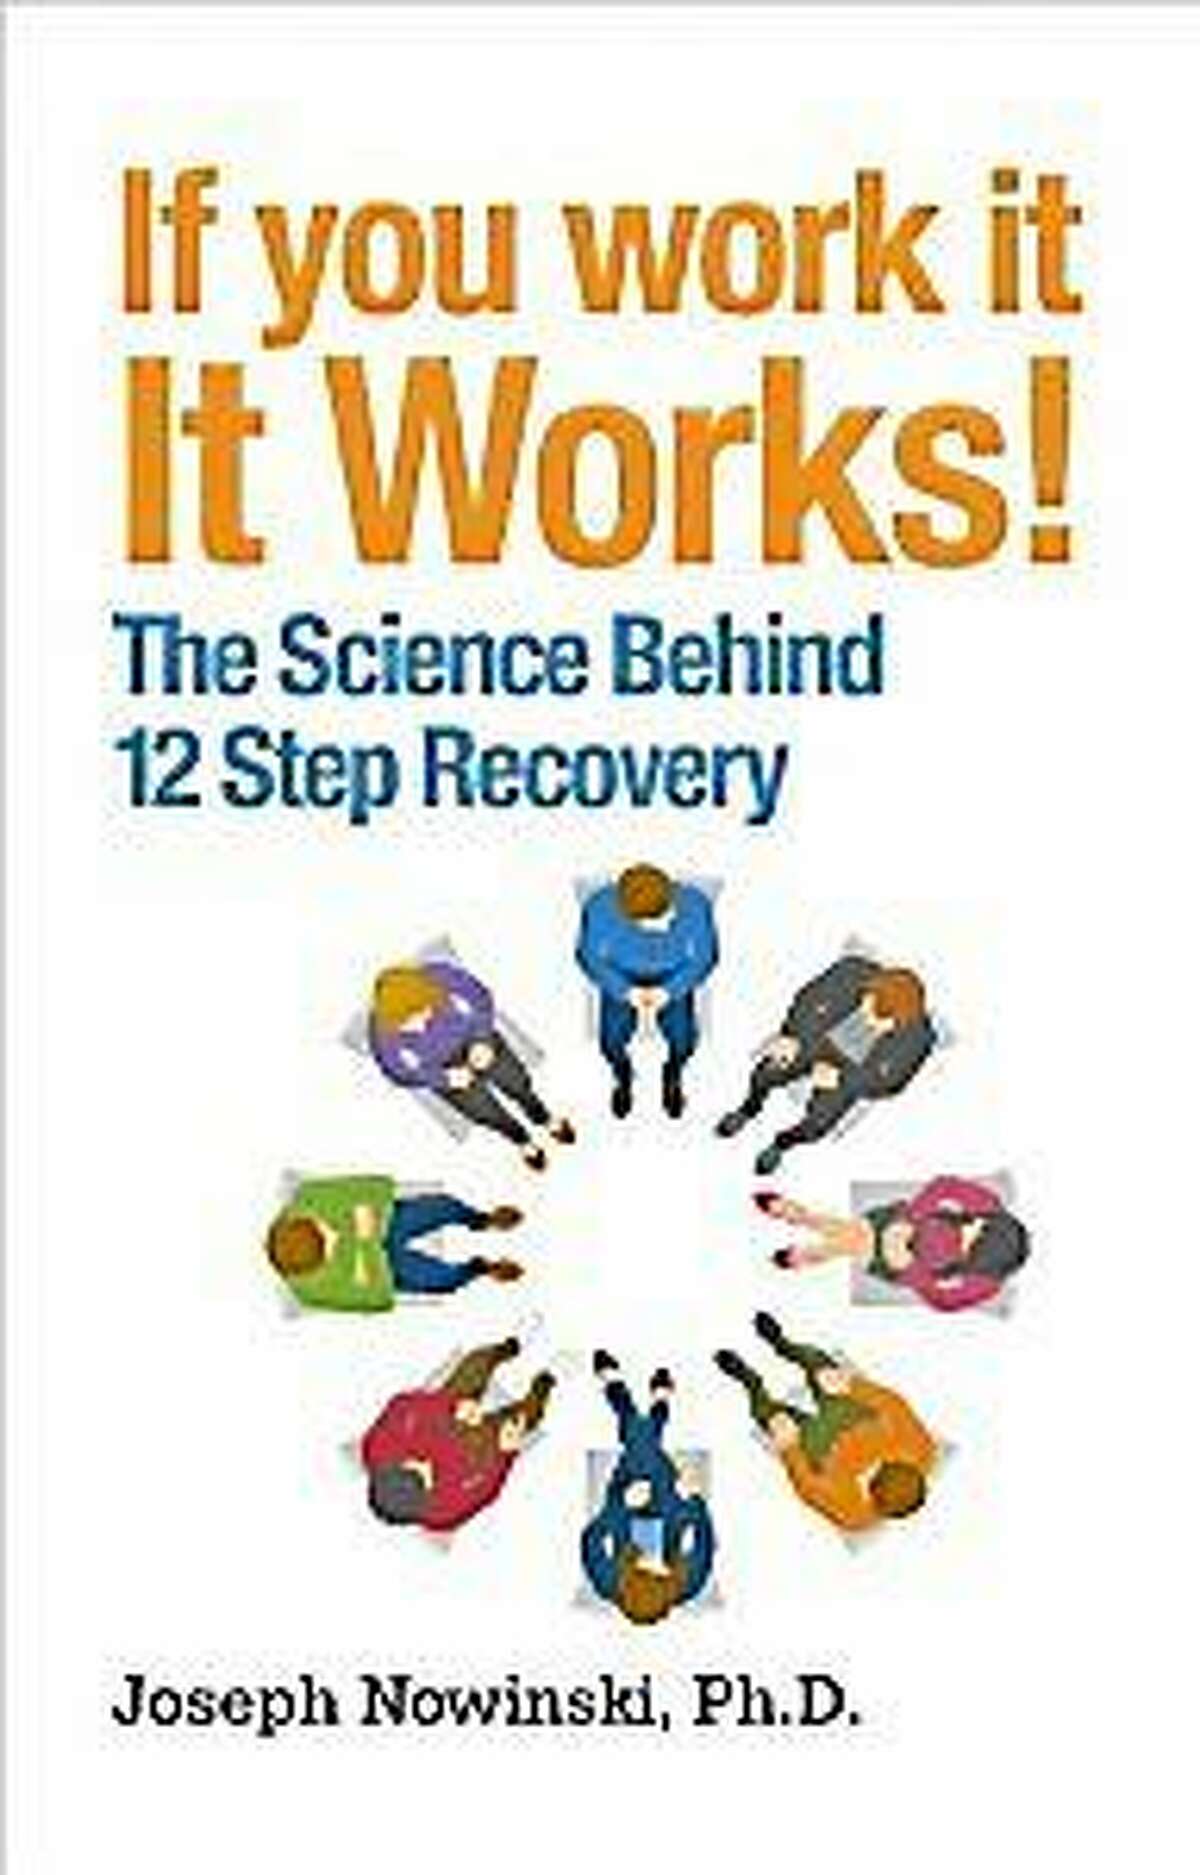 Joseph Nowinski, a clinic psychologist, wrote "If You Work It, It Works!î to look at the scientific basis for 12-step recovery.